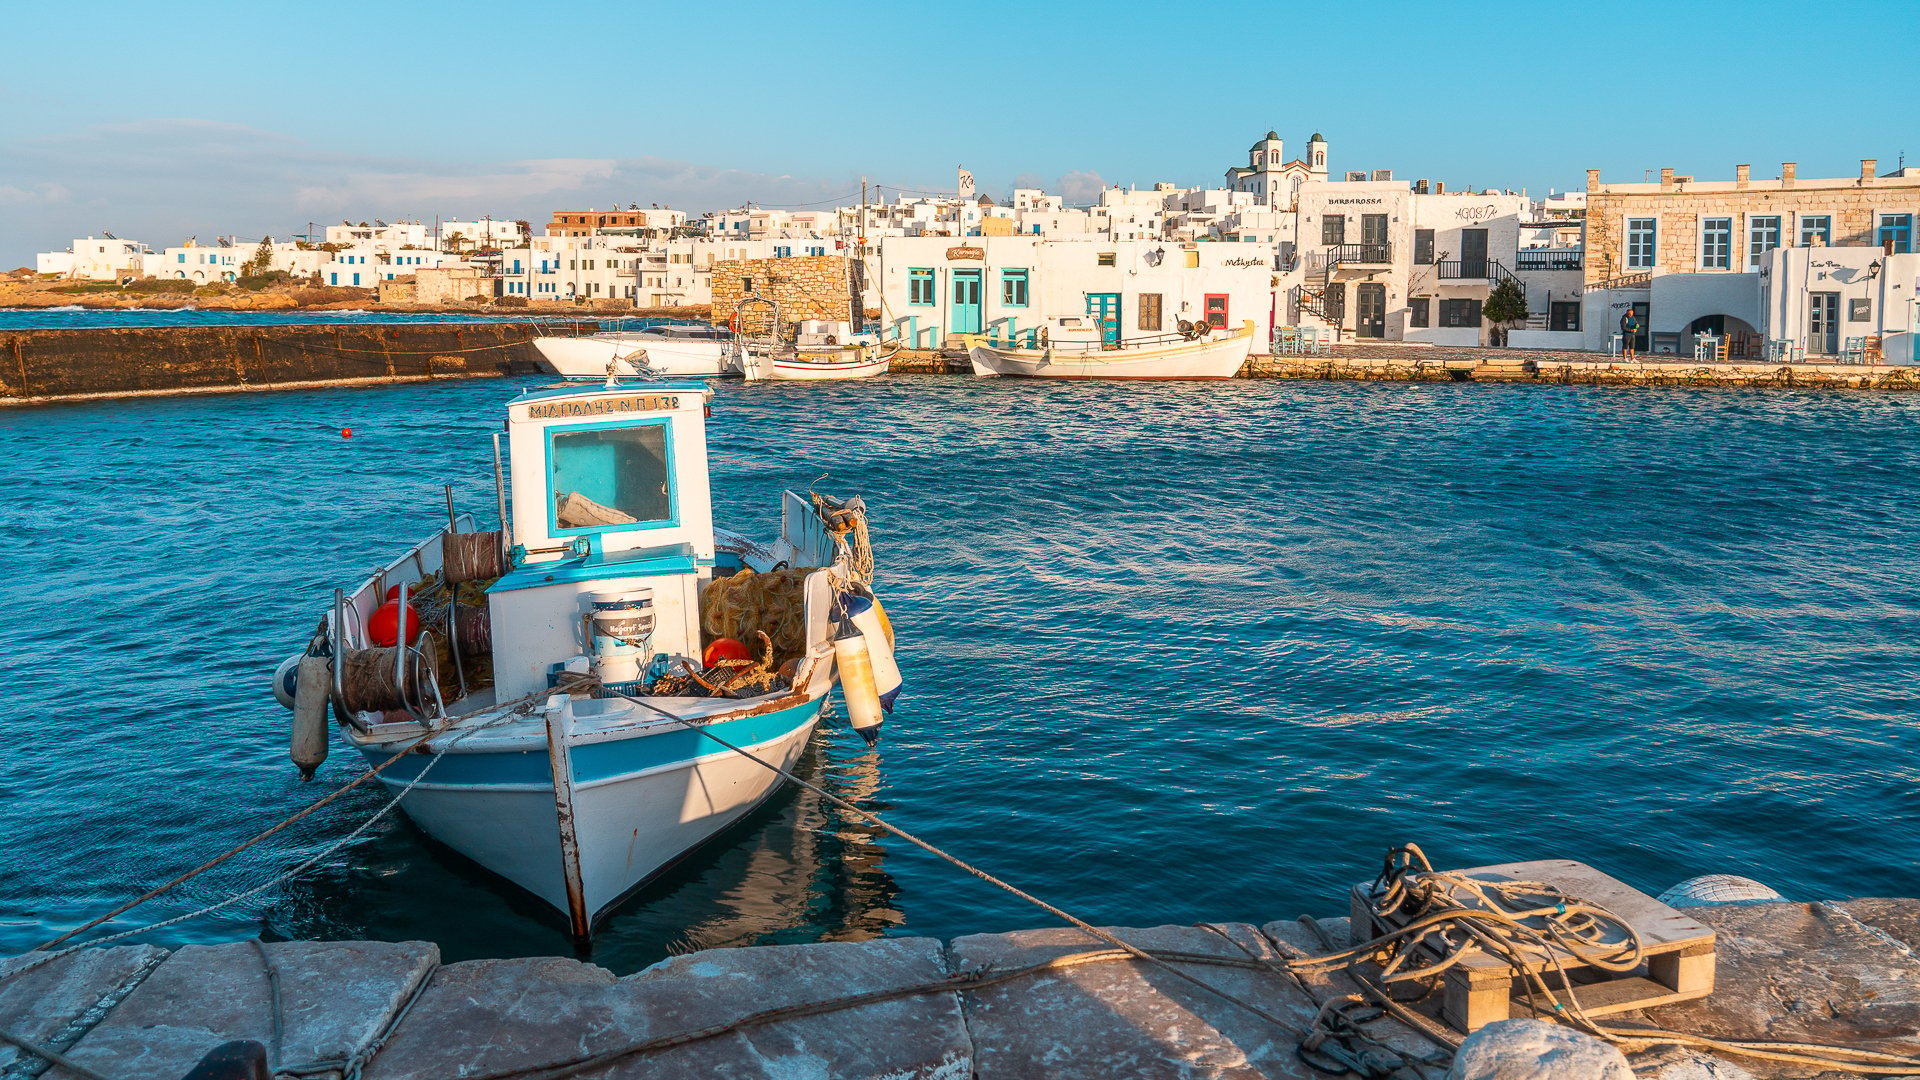 This image shows the quaint Old Port of Naoussa in the background and a wooden fishing boat in the foreground. 